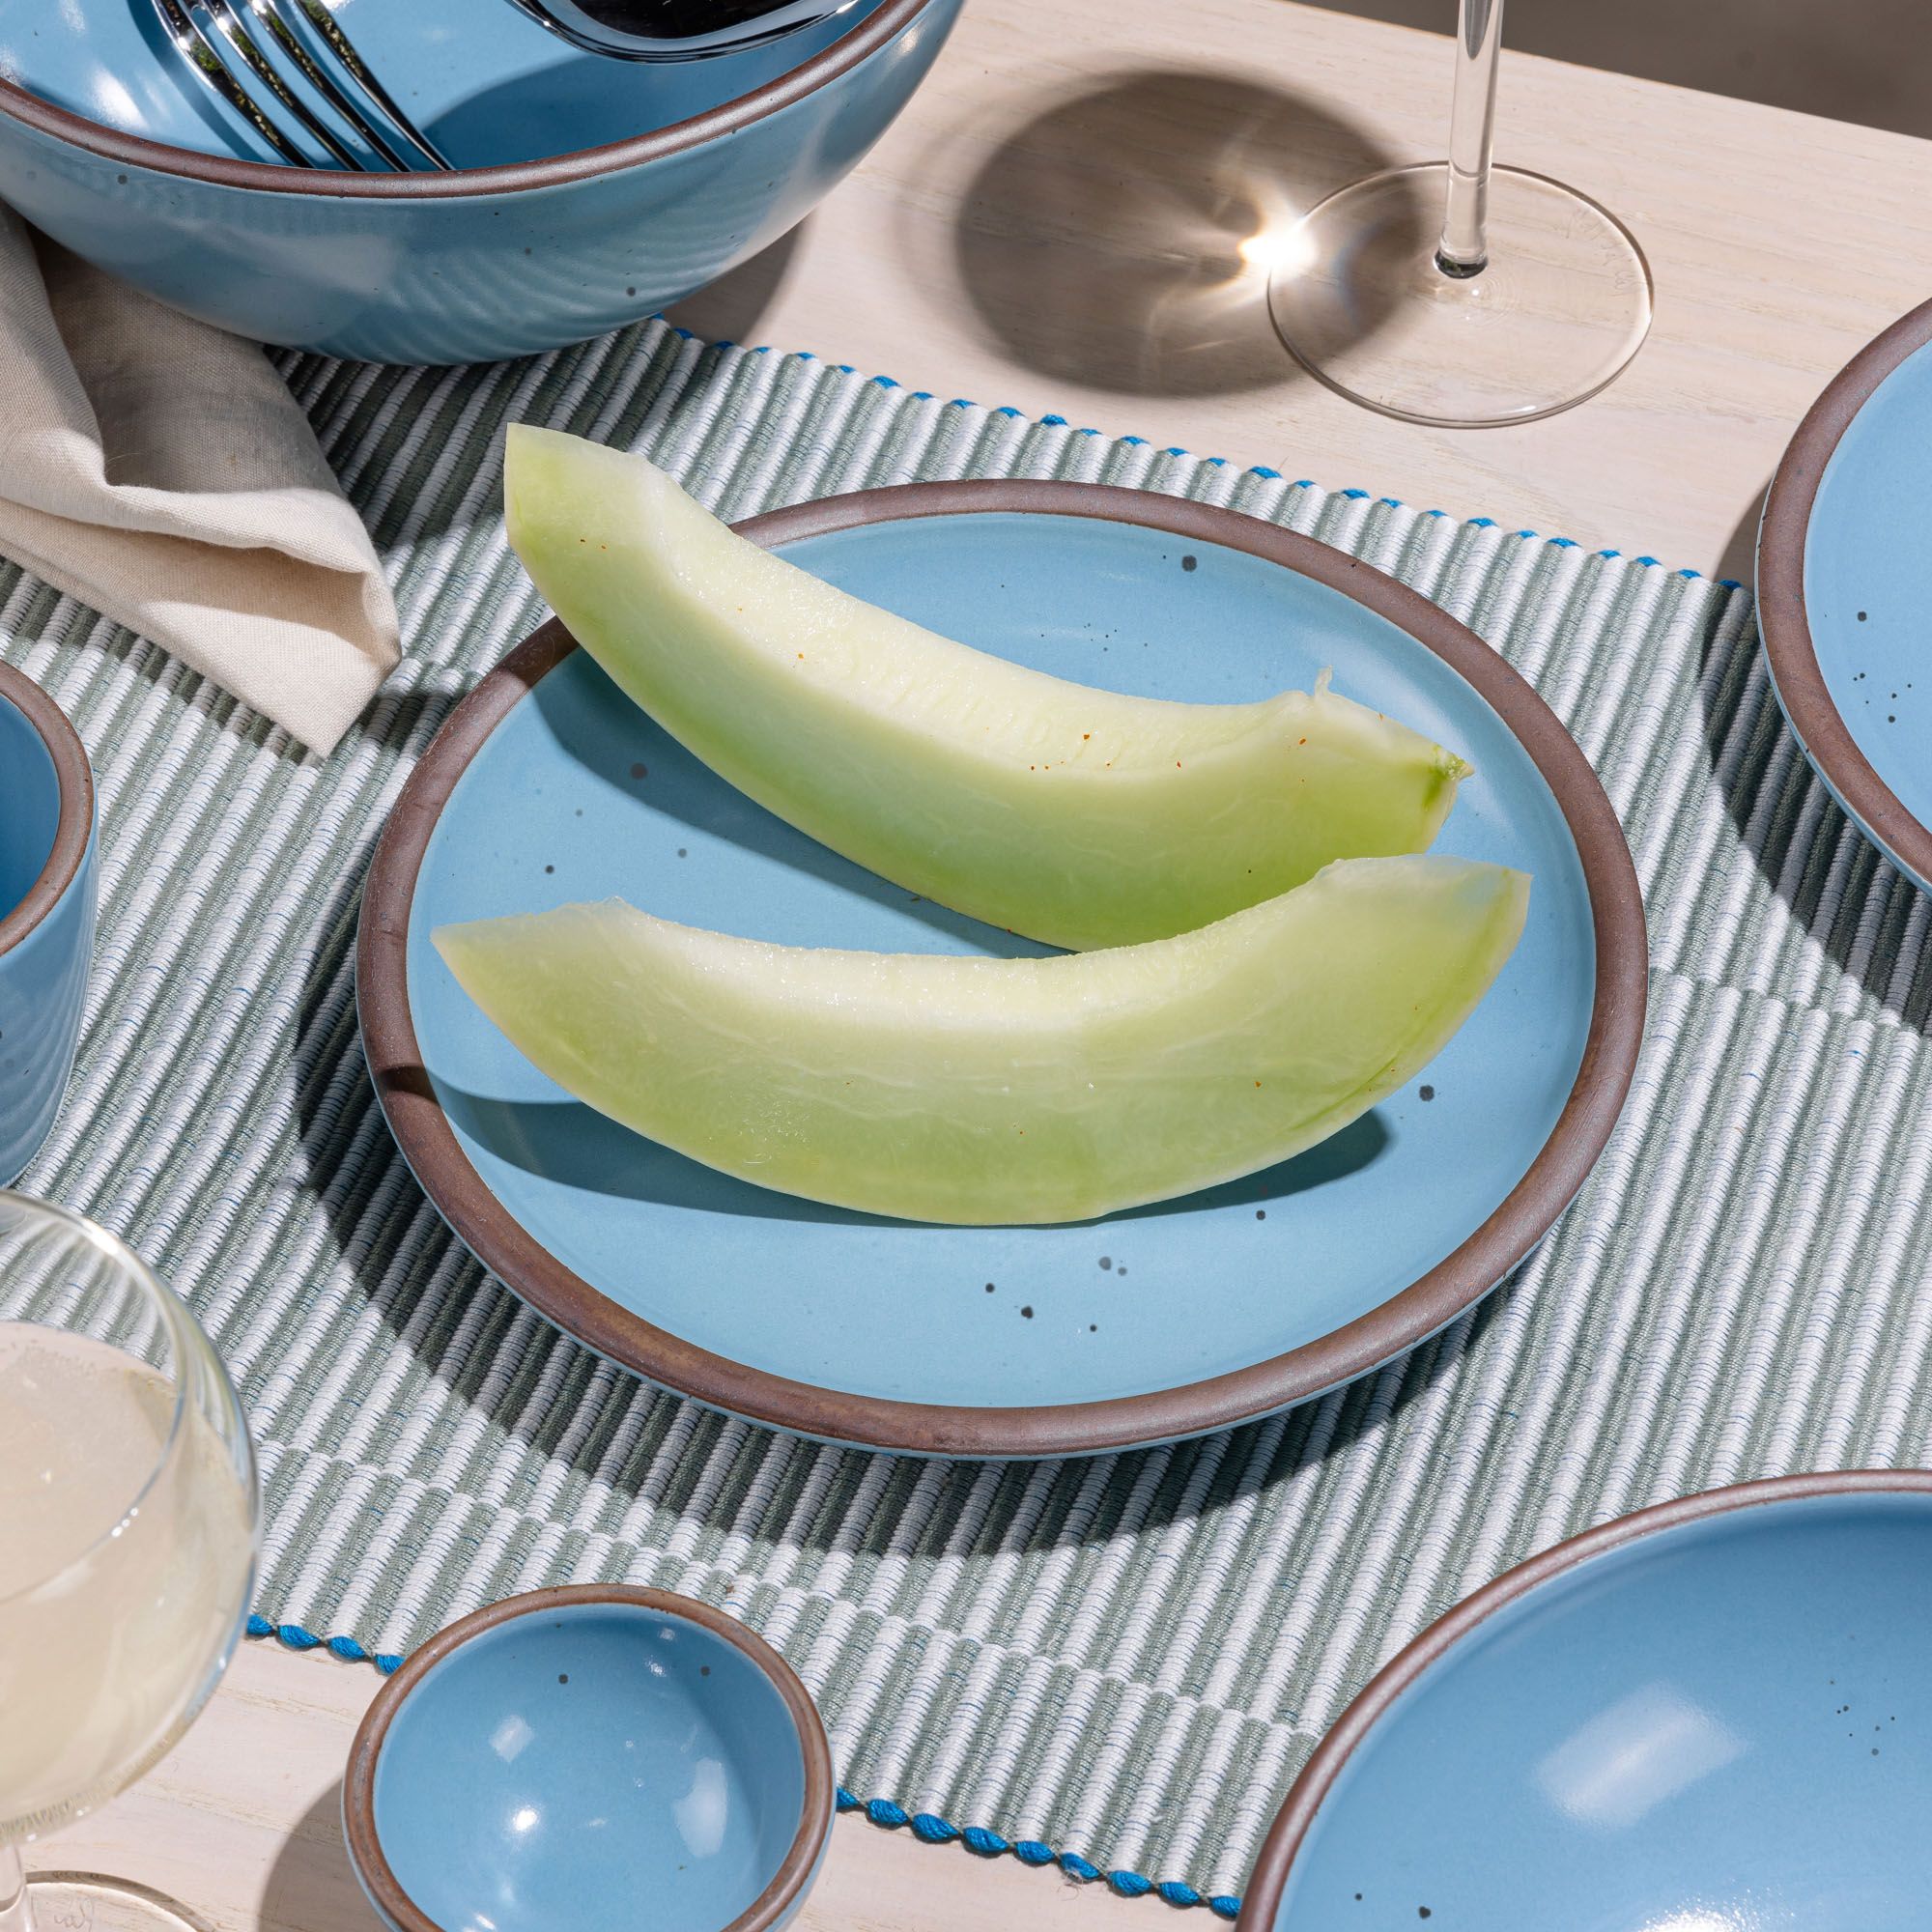 Melon slices are sitting on a ceramic robin's egg blue color on a striped placemat.